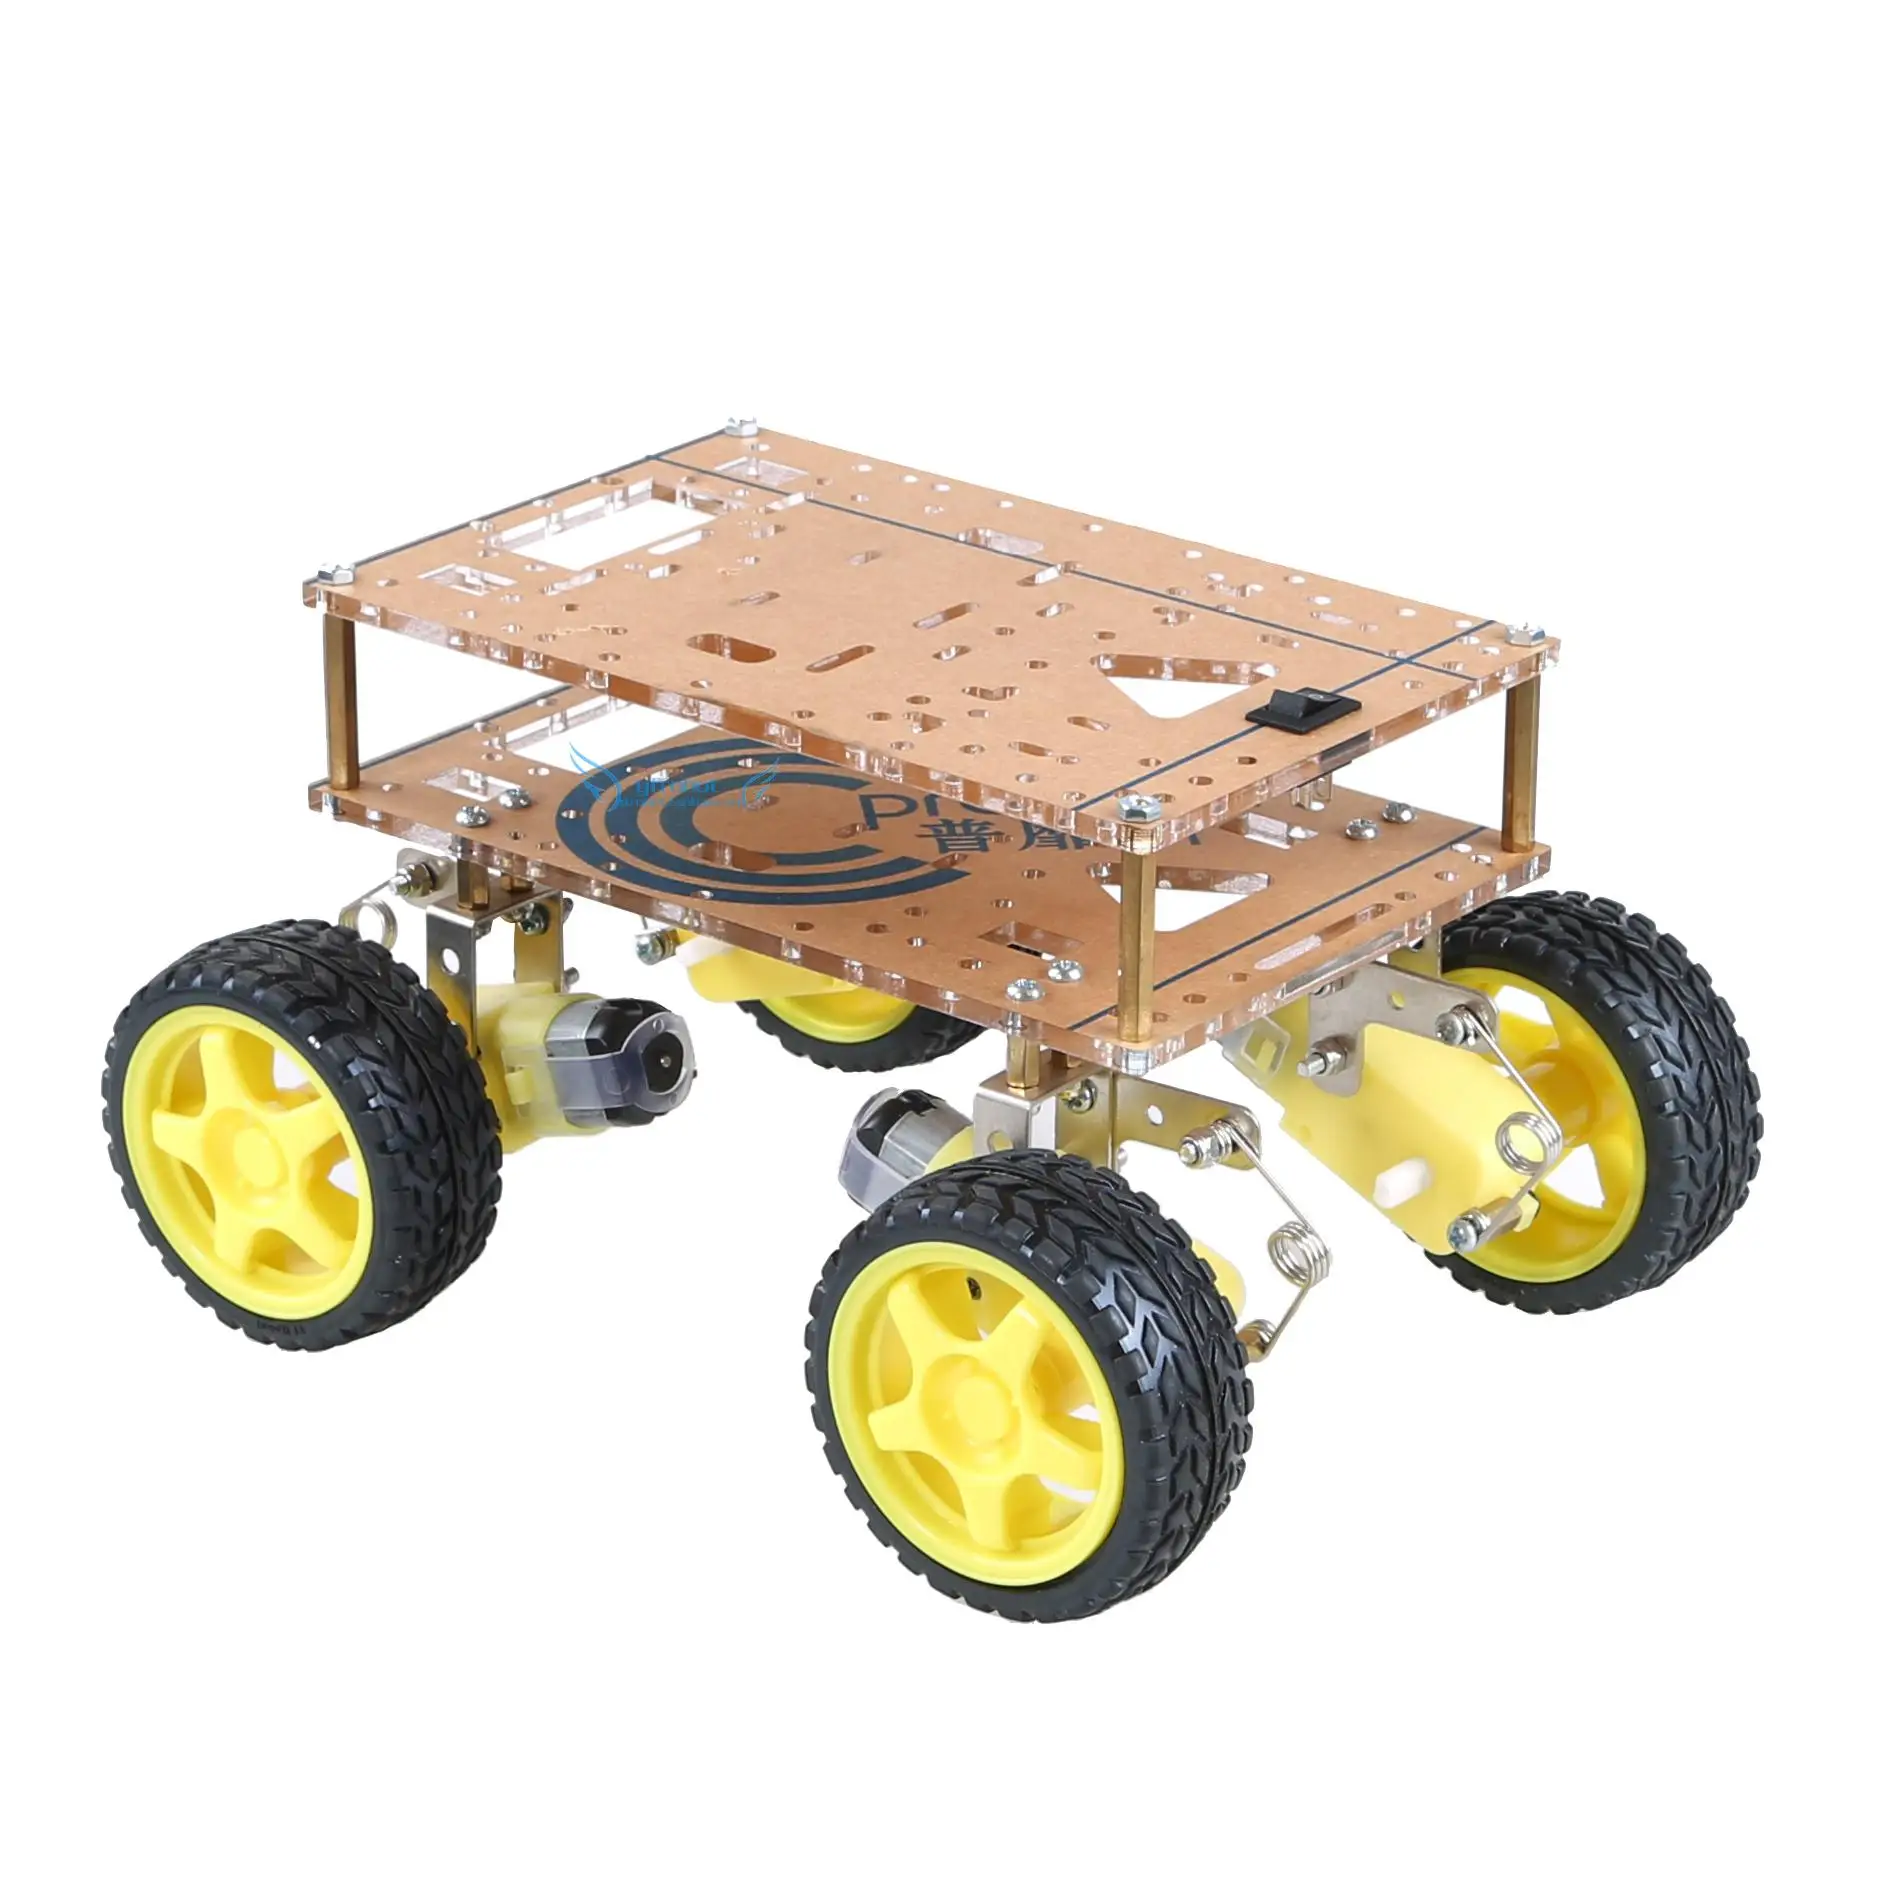 4WD Suspension Robot Car Chassis 5kg Load Intelligent Shock Absorption Free Battery Box for Arduino Wifi DIY Parts